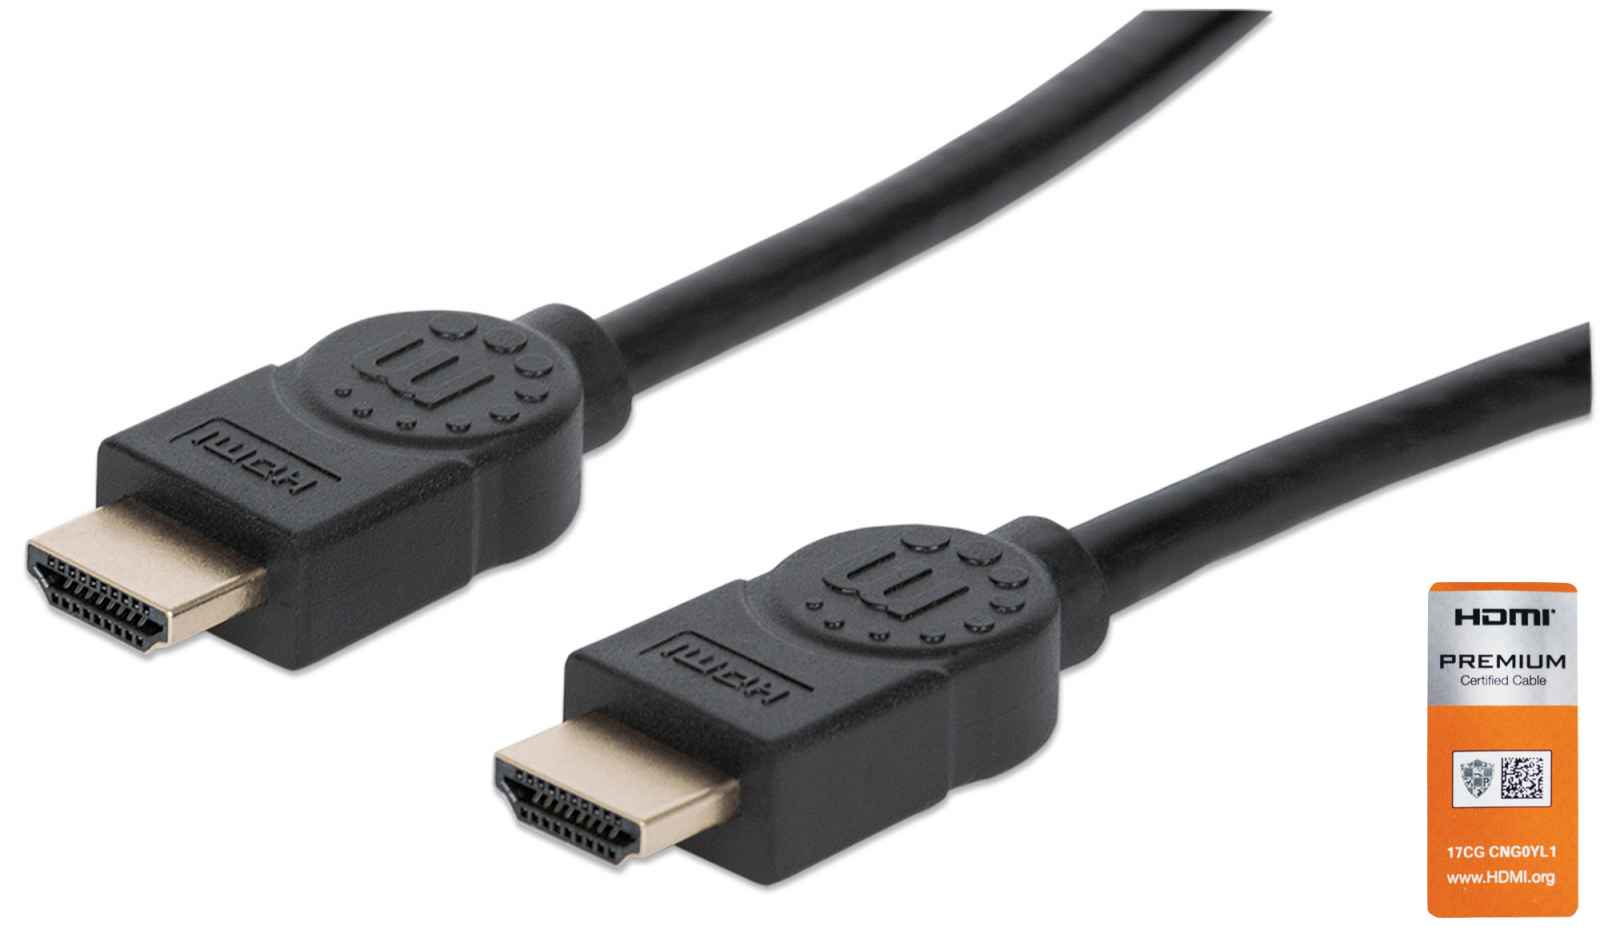 Photos - Cable (video, audio, USB) MANHATTAN HDMI Cable with Ethernet, 4K@60Hz , 1m, 3548 (Premium High Speed)